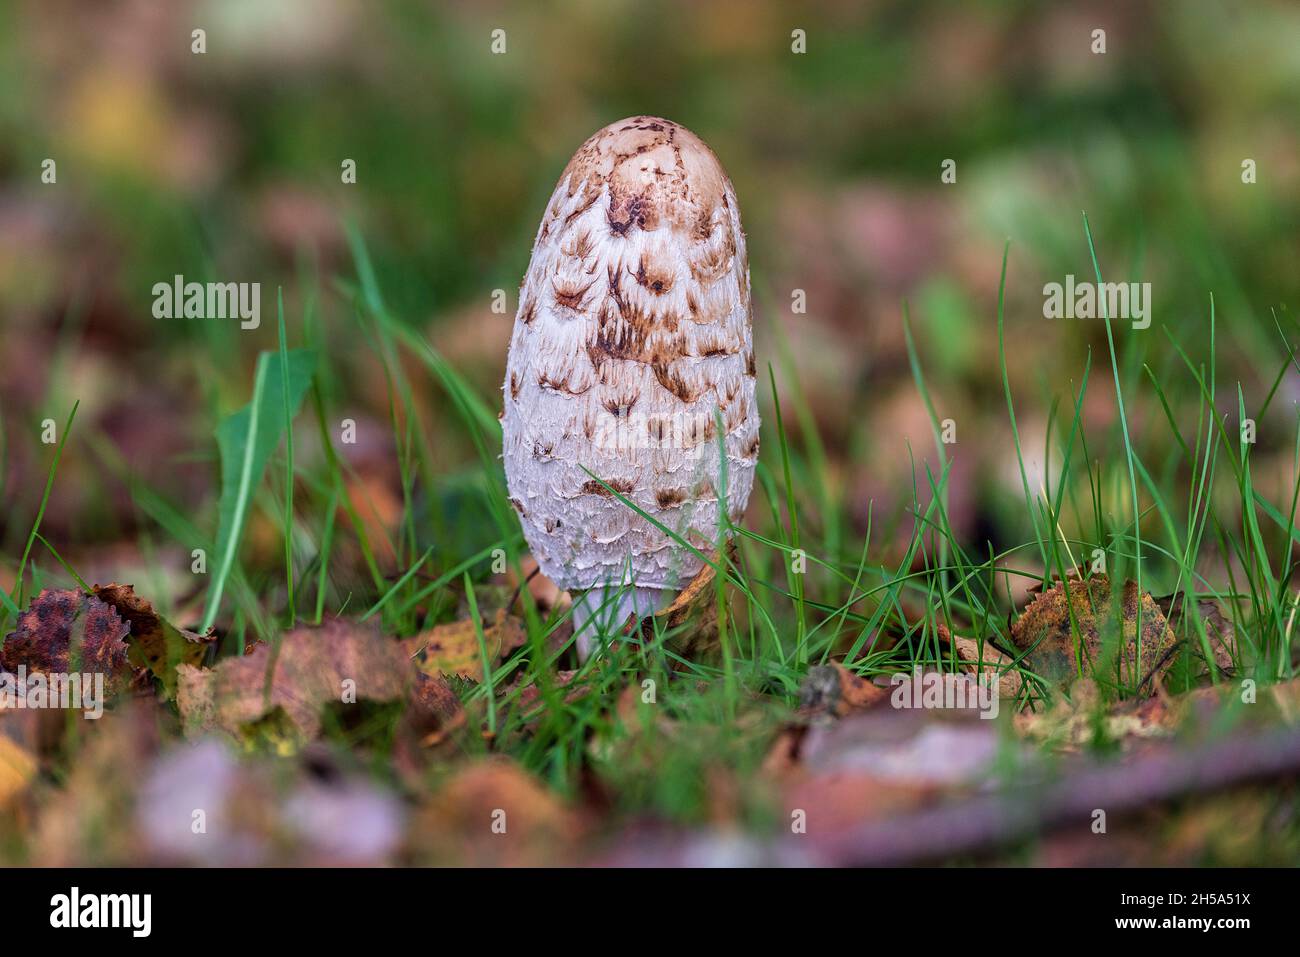 Shaggy Inkcap or Lawyers Wig mushroom. Early stage. Stock Photo